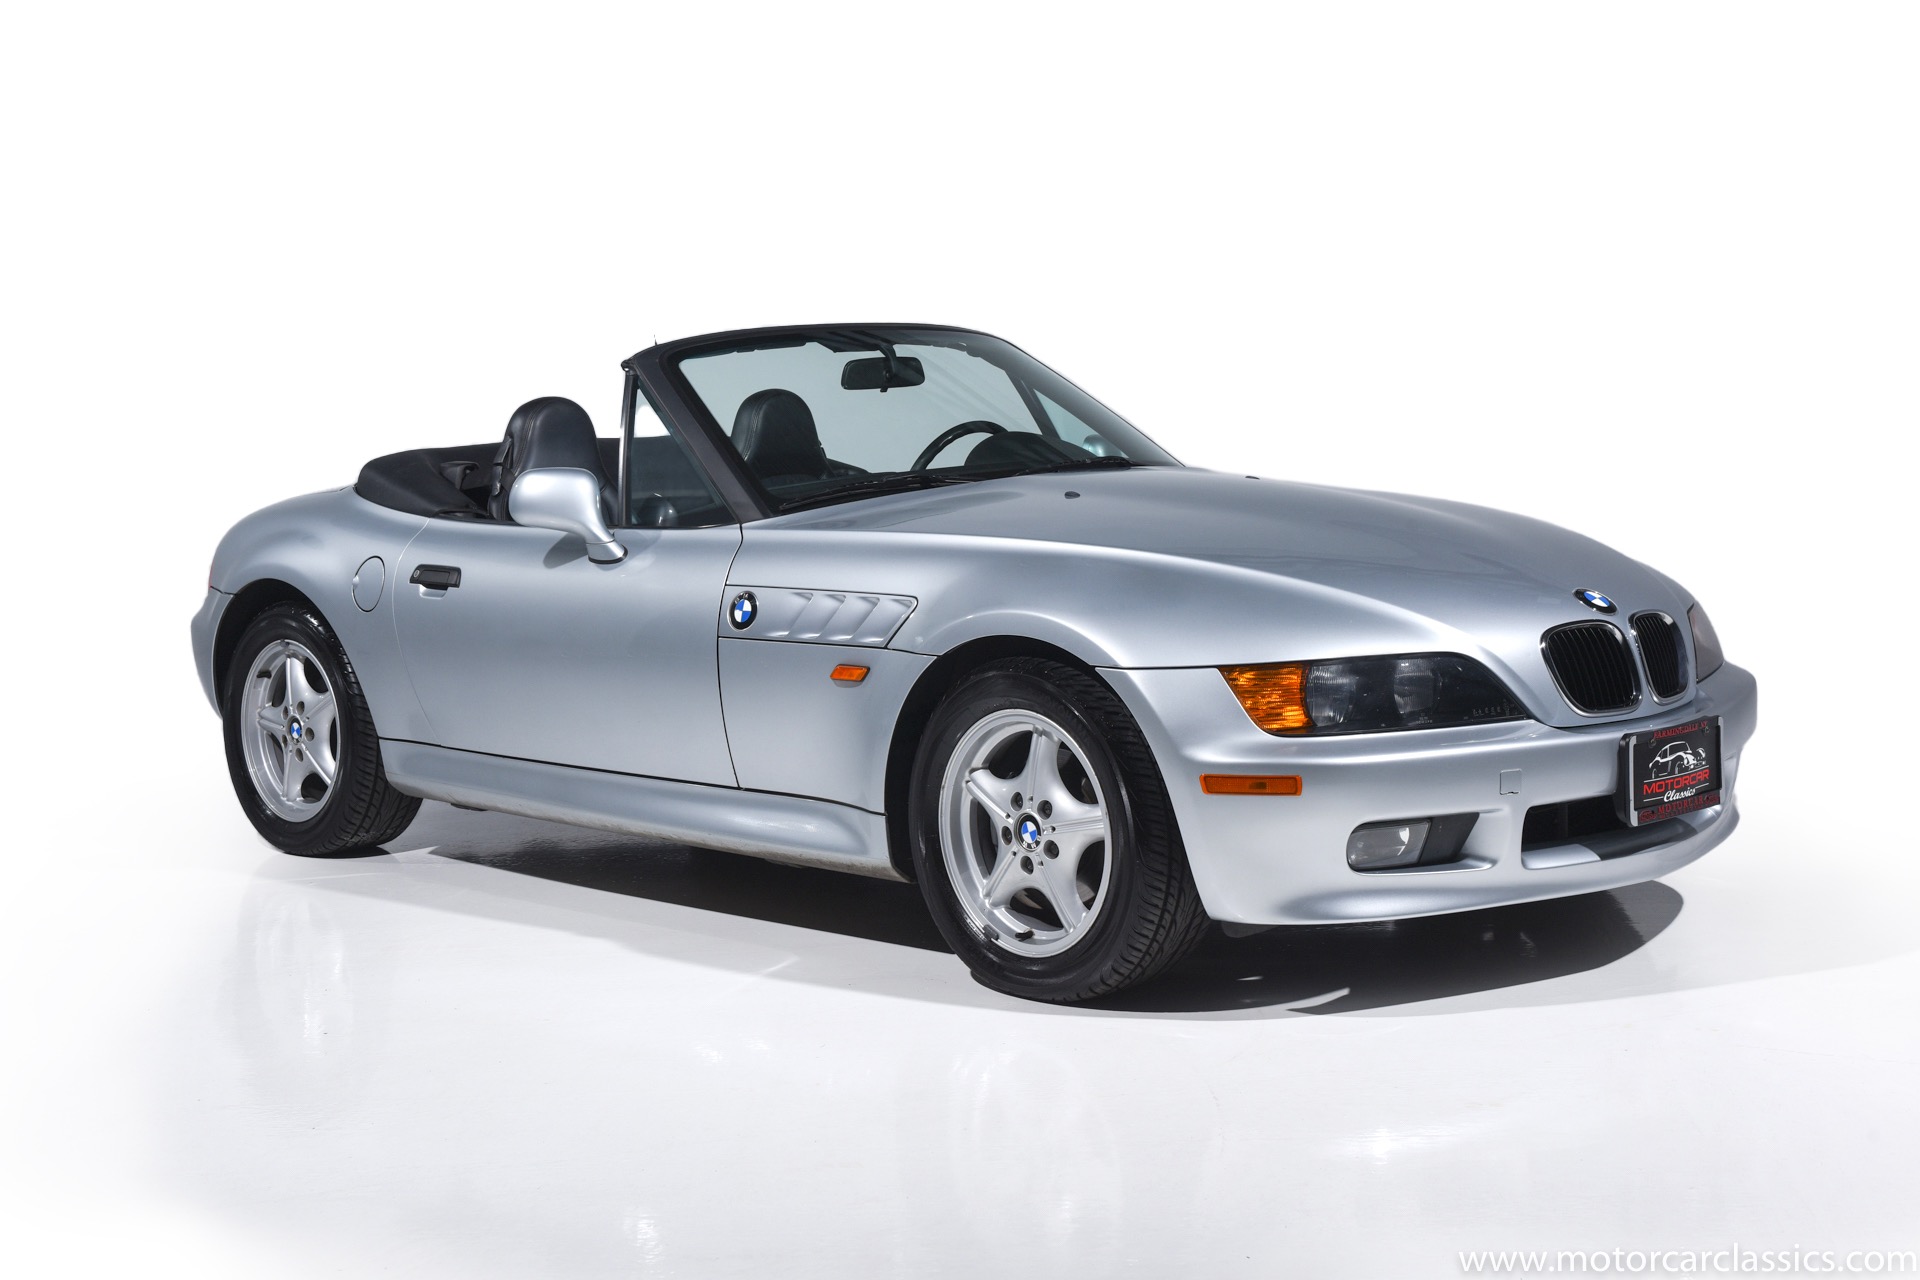 Used 1997 BMW Z3 1.9 For Sale ($14,900) | Motorcar Classics Stock #1905